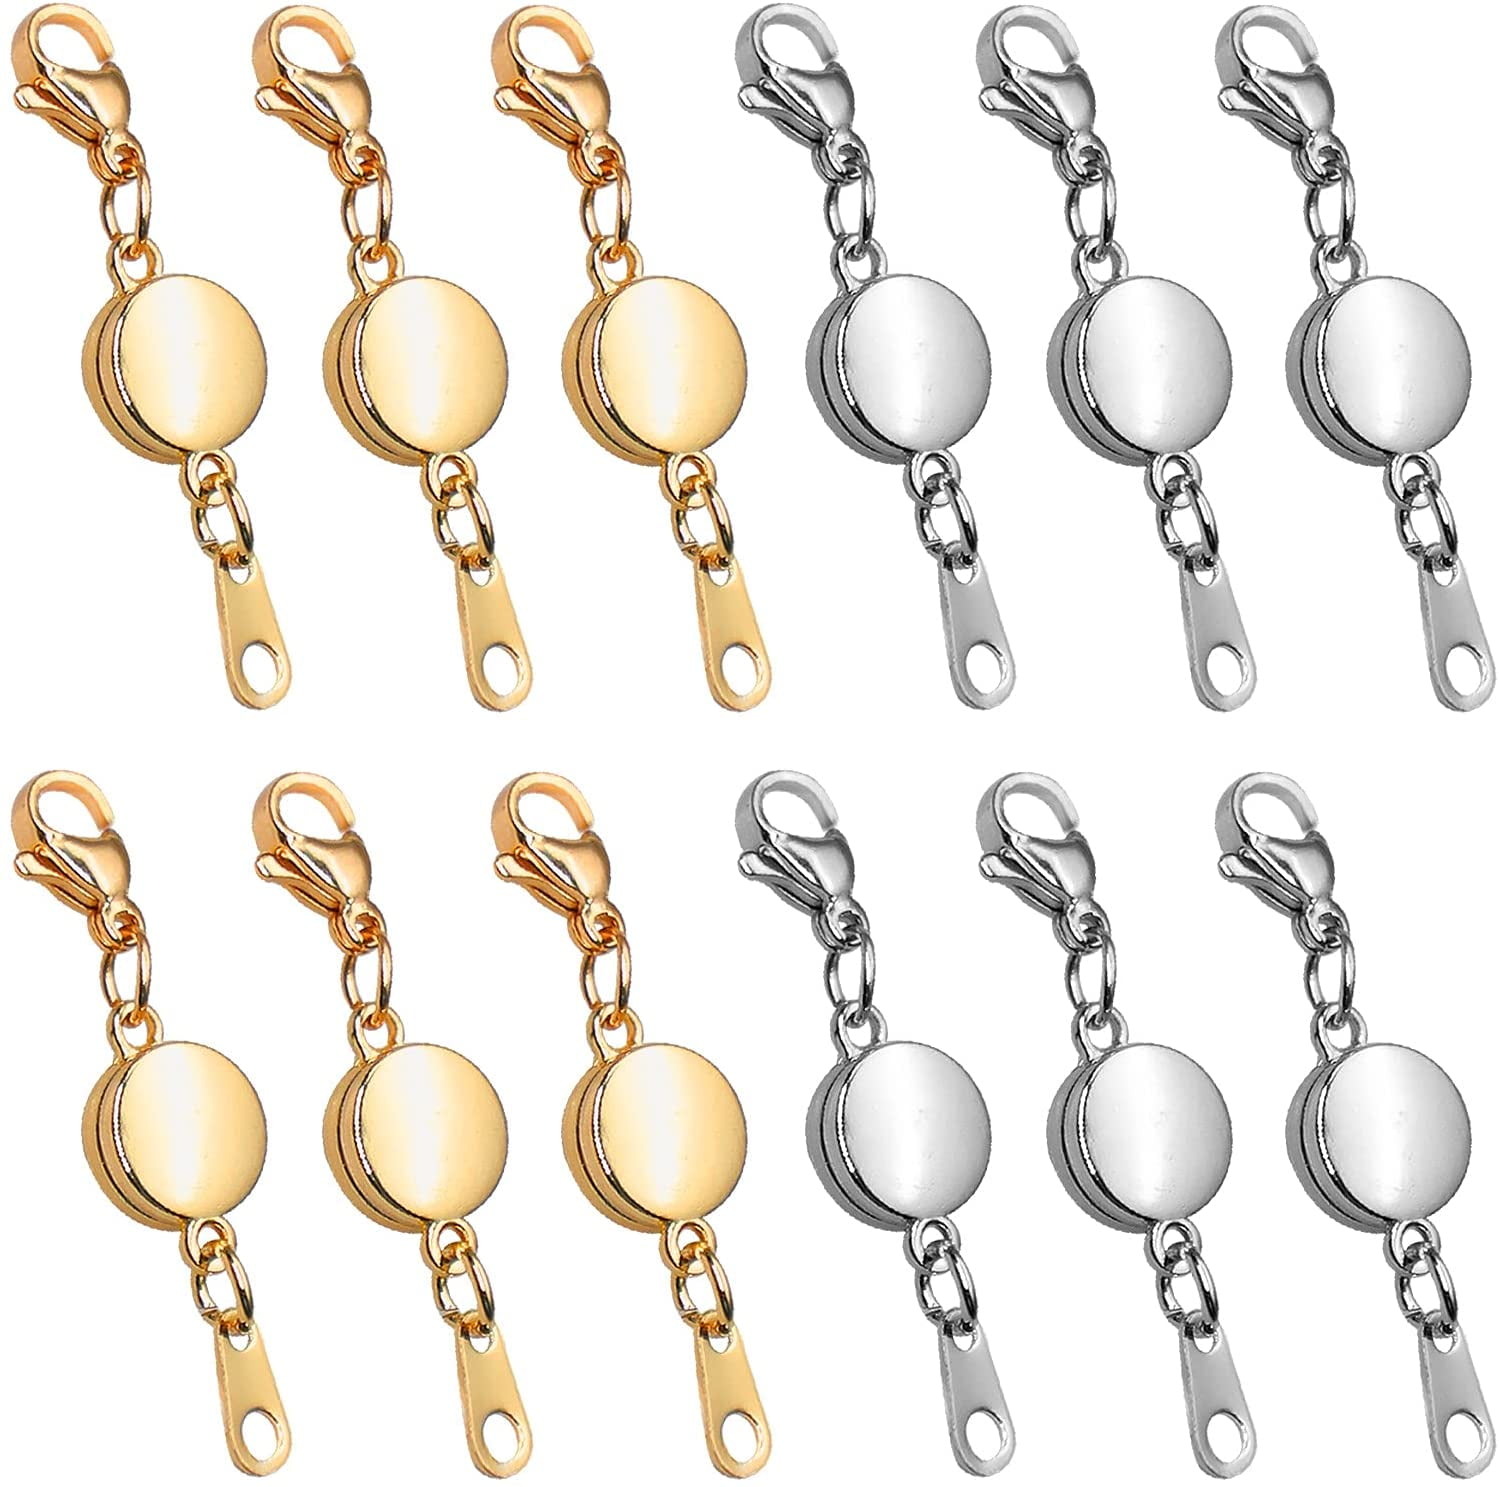 6PCS Locking Magnetic Clasps for Necklace Gold and Silver Plated Tube Lock Connectors for Bracelet Jewelry 4 PCS - BO 